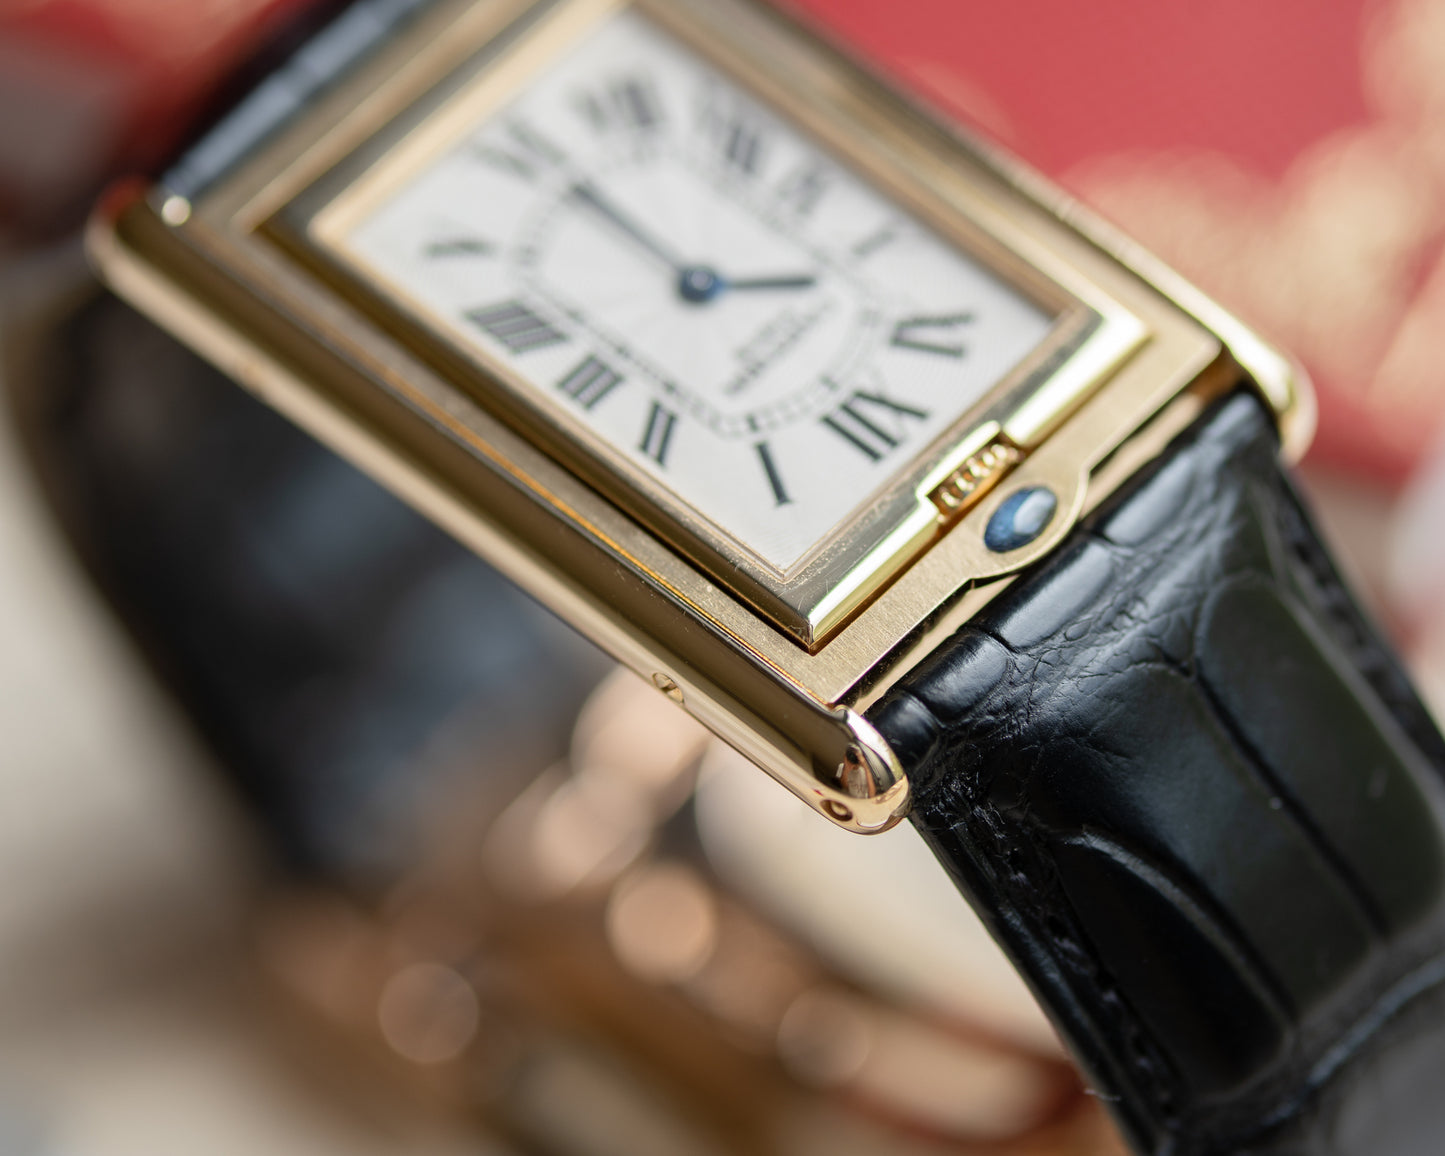 Cartier Tank Basculante CPCP Millenium Limited Edition in Yellow Gold